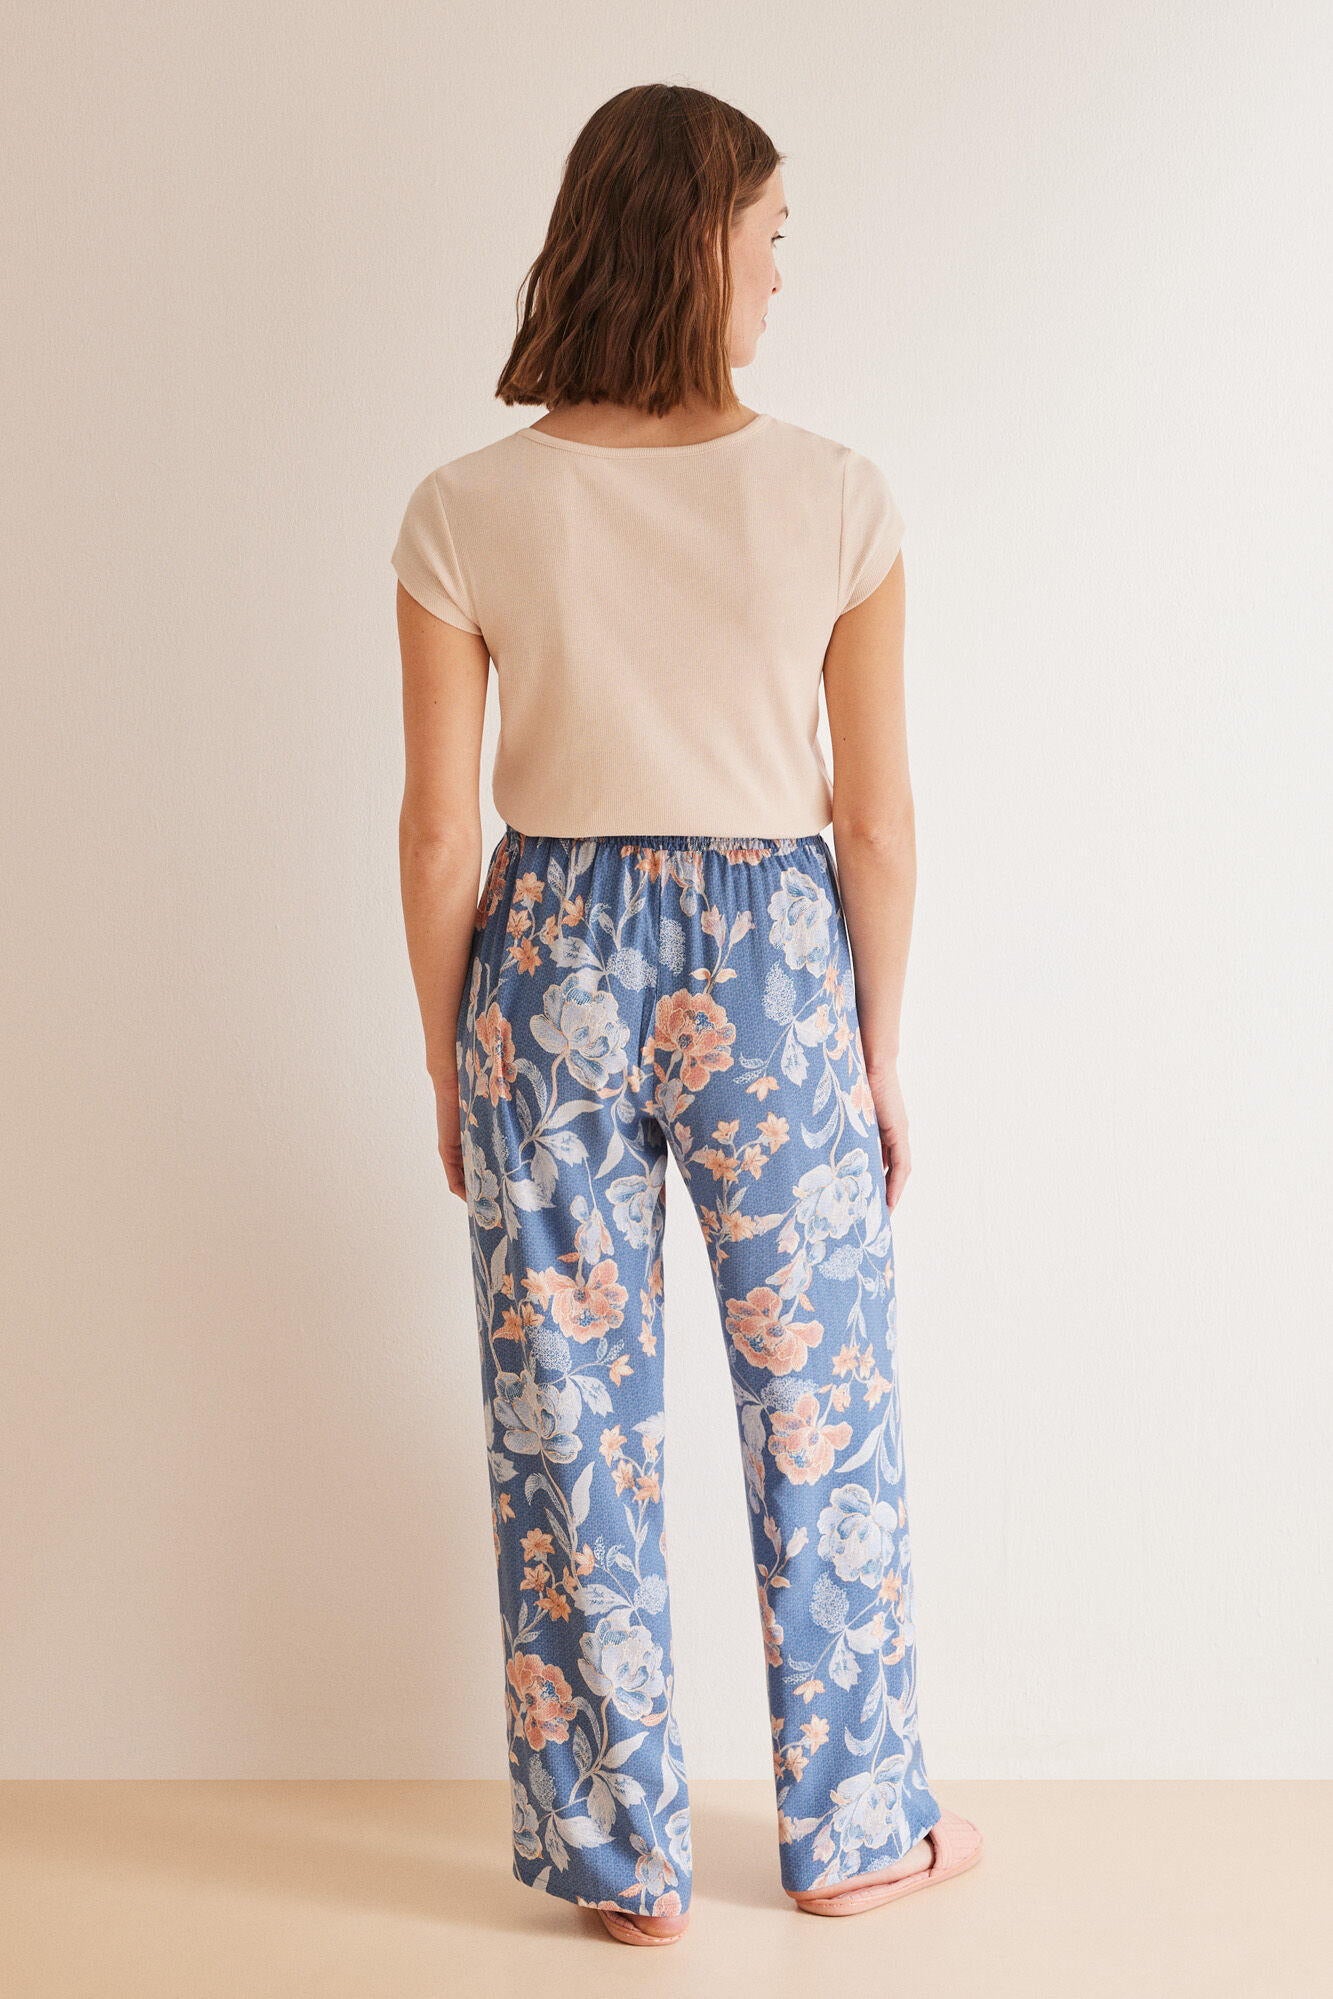 Slip On Lounge Trousers_3707195_19_04